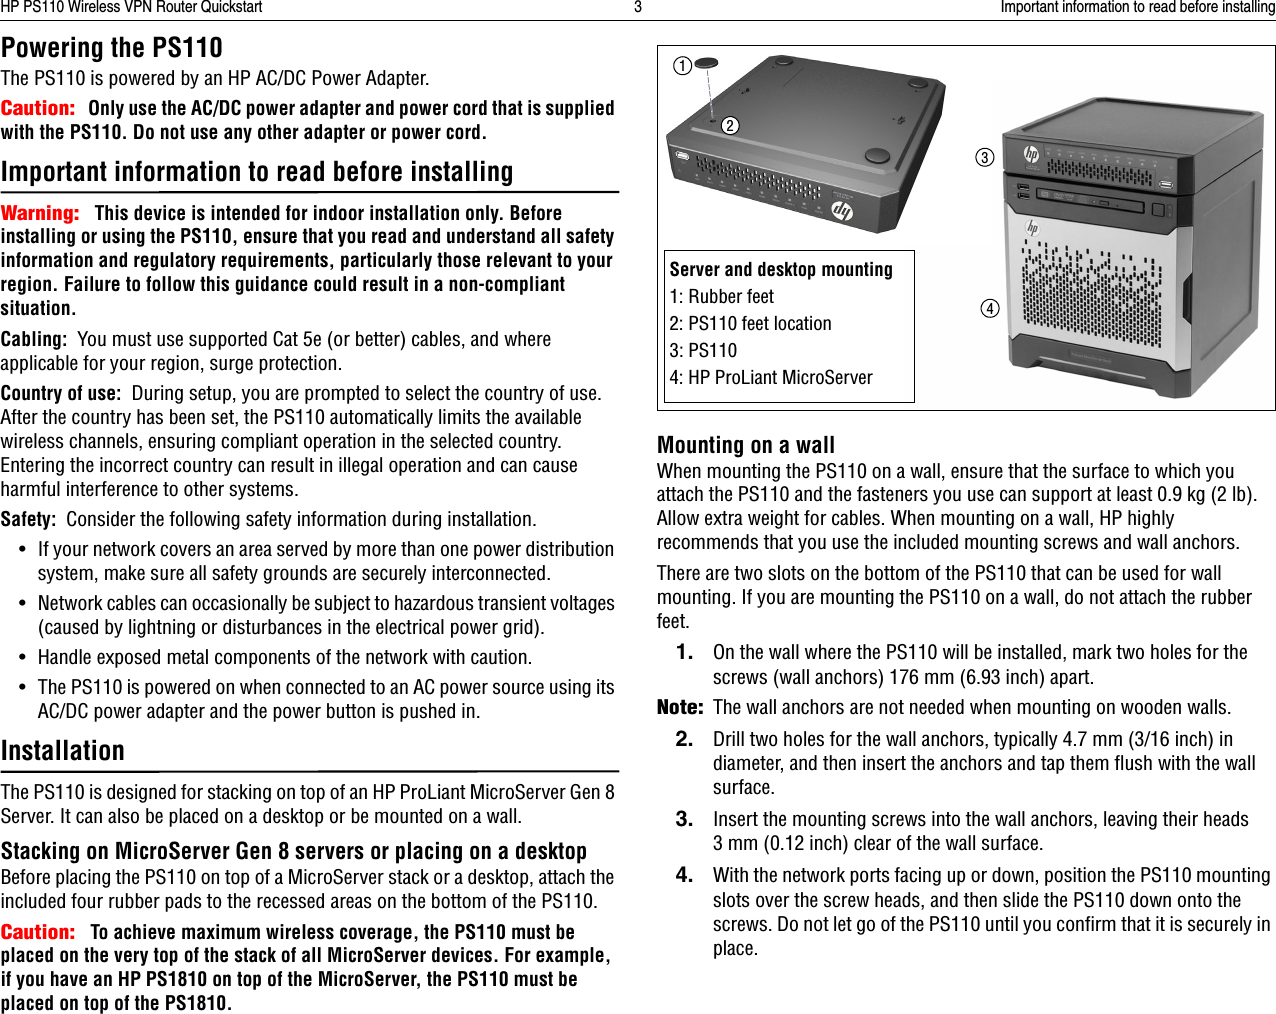 HP PS110 Wireless VPN Router Quickstart 3 Important information to read before installingPowering the PS110The PS110 is powered by an HP AC/DC Power Adapter.Caution:   Only use the AC/DC power adapter and power cord that is supplied with the PS110. Do not use any other adapter or power cord.Important information to read before installingWarning:   This device is intended for indoor installation only. Before installing or using the PS110, ensure that you read and understand all safety information and regulatory requirements, particularly those relevant to your region. Failure to follow this guidance could result in a non-compliant situation.Cabling:  You must use supported Cat 5e (or better) cables, and where applicable for your region, surge protection. Country of use:  During setup, you are prompted to select the country of use. After the country has been set, the PS110 automatically limits the available wireless channels, ensuring compliant operation in the selected country. Entering the incorrect country can result in illegal operation and can cause harmful interference to other systems.Safety:  Consider the following safety information during installation.• If your network covers an area served by more than one power distribution system, make sure all safety grounds are securely interconnected. • Network cables can occasionally be subject to hazardous transient voltages (caused by lightning or disturbances in the electrical power grid).• Handle exposed metal components of the network with caution.• The PS110 is powered on when connected to an AC power source using its AC/DC power adapter and the power button is pushed in.InstallationThe PS110 is designed for stacking on top of an HP ProLiant MicroServer Gen 8 Server. It can also be placed on a desktop or be mounted on a wall. Stacking on MicroServer Gen 8 servers or placing on a desktopBefore placing the PS110 on top of a MicroServer stack or a desktop, attach the included four rubber pads to the recessed areas on the bottom of the PS110.Caution:   To achieve maximum wireless coverage, the PS110 must be placed on the very top of the stack of all MicroServer devices. For example, if you have an HP PS1810 on top of the MicroServer, the PS110 must be placed on top of the PS1810.Mounting on a wallWhen mounting the PS110 on a wall, ensure that the surface to which you attach the PS110 and the fasteners you use can support at least 0.9 kg (2 lb). Allow extra weight for cables. When mounting on a wall, HP highly recommends that you use the included mounting screws and wall anchors.There are two slots on the bottom of the PS110 that can be used for wall mounting. If you are mounting the PS110 on a wall, do not attach the rubber feet.1. On the wall where the PS110 will be installed, mark two holes for the screws (wall anchors) 176 mm (6.93 inch) apart. Note:The wall anchors are not needed when mounting on wooden walls.2. Drill two holes for the wall anchors, typically 4.7 mm (3/16 inch) in diameter, and then insert the anchors and tap them flush with the wall surface.3. Insert the mounting screws into the wall anchors, leaving their heads 3 mm (0.12 inch) clear of the wall surface.4. With the network ports facing up or down, position the PS110 mounting slots over the screw heads, and then slide the PS110 down onto the screws. Do not let go of the PS110 until you confirm that it is securely in place.Server and desktop mounting1: Rubber feet2: PS110 feet location3: PS1104: HP ProLiant MicroServer1234